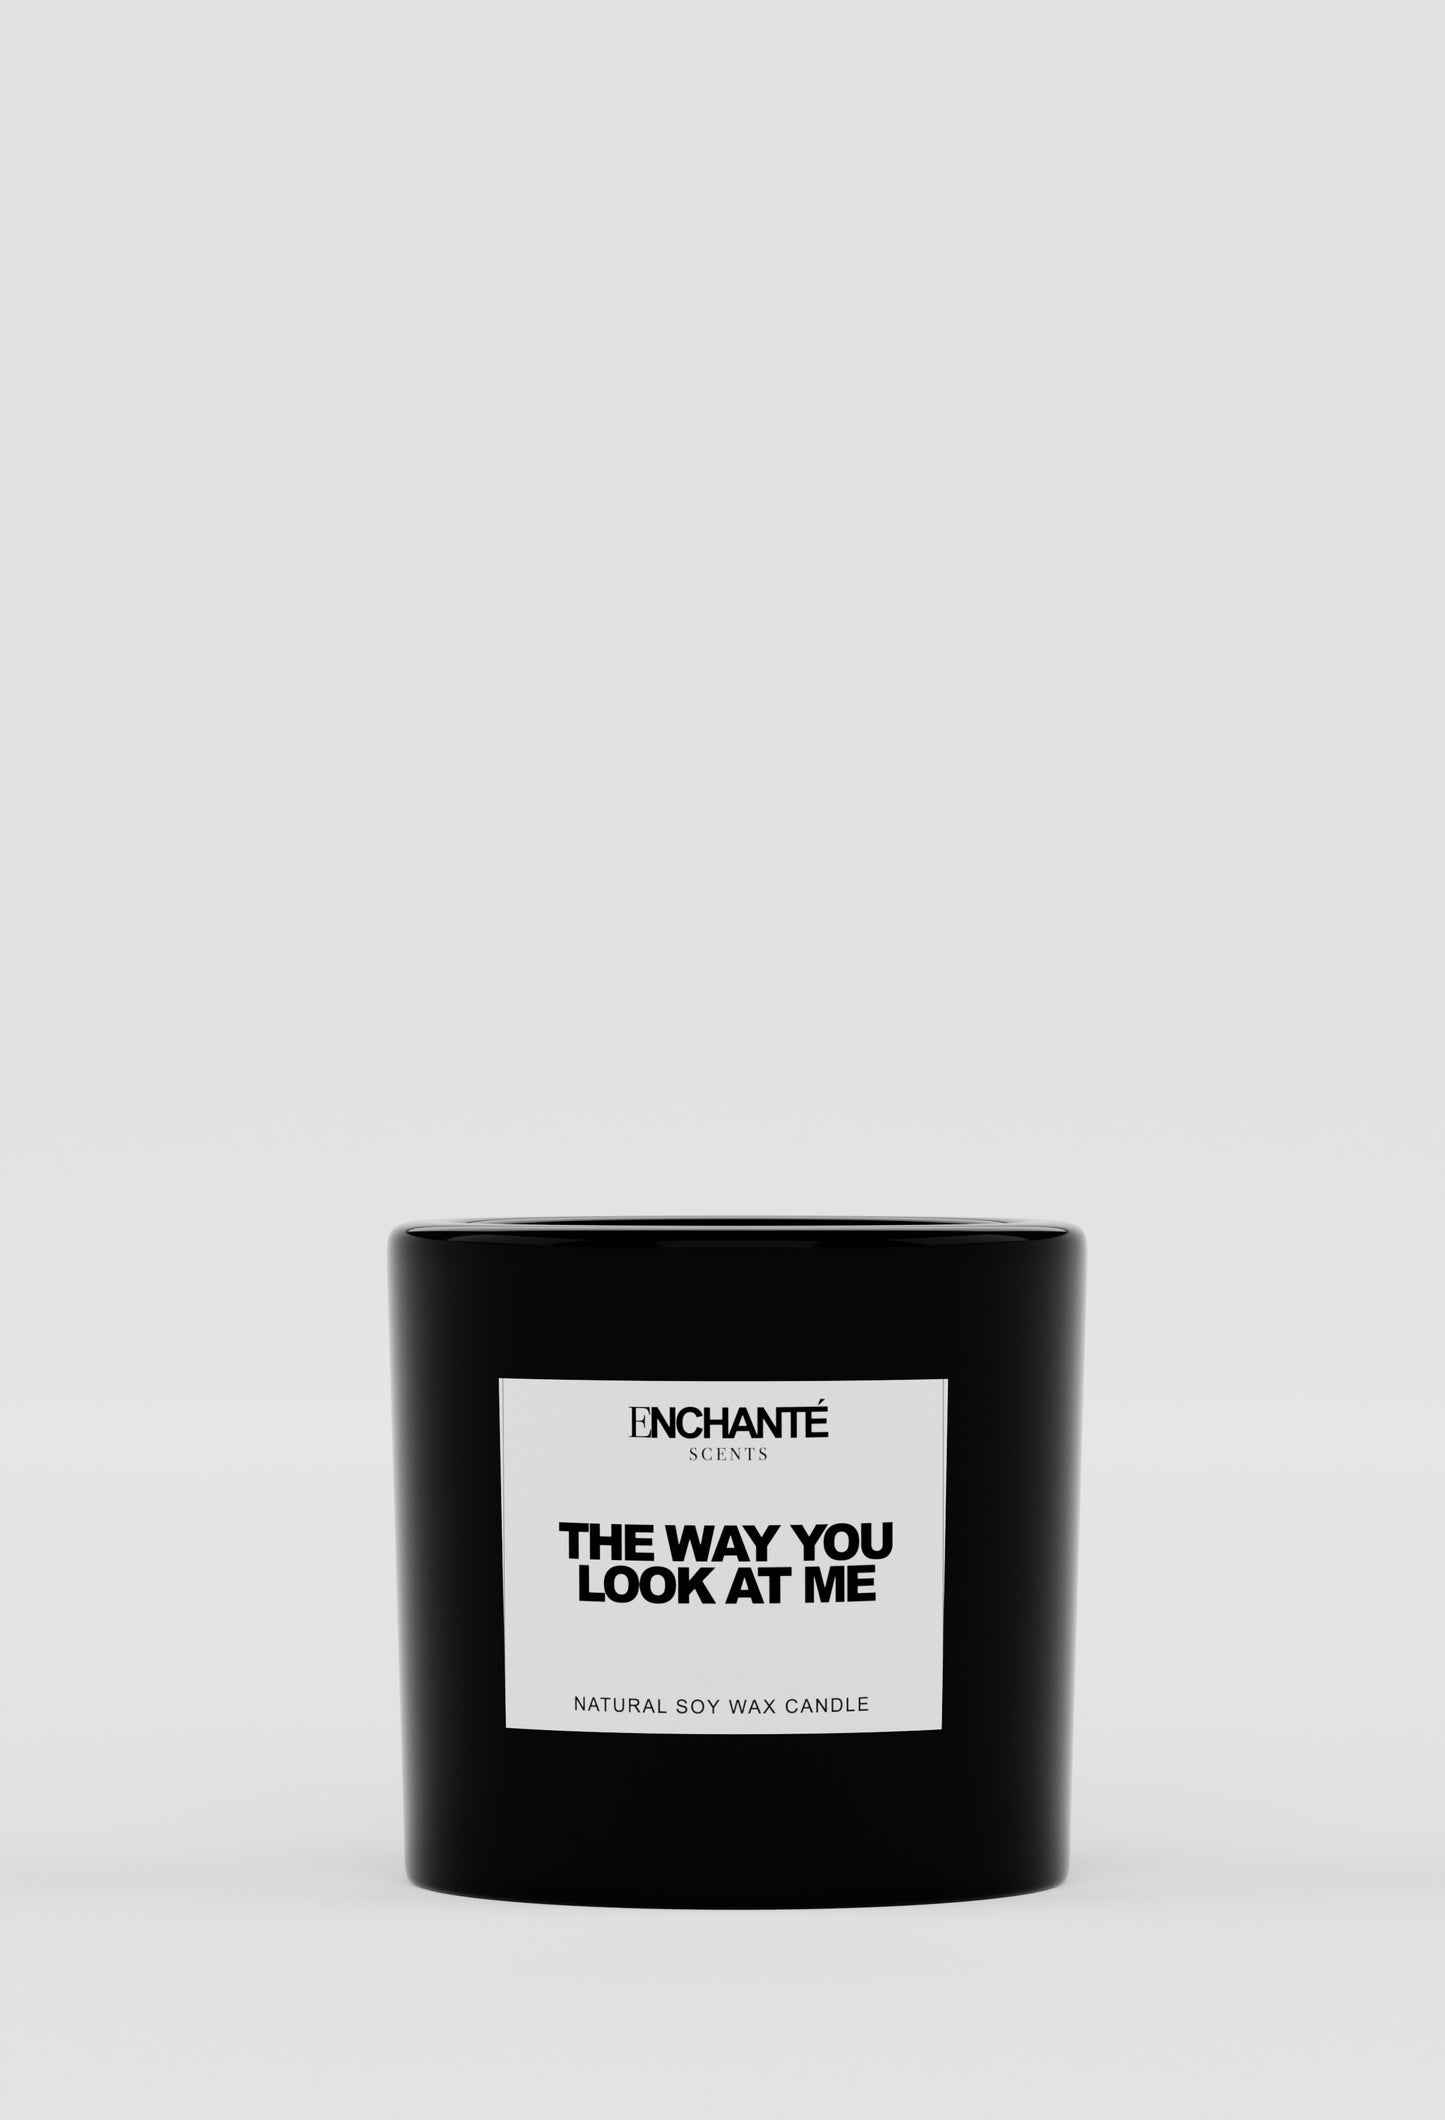 THE WAY YOU LOOK AT ME Scented Candle